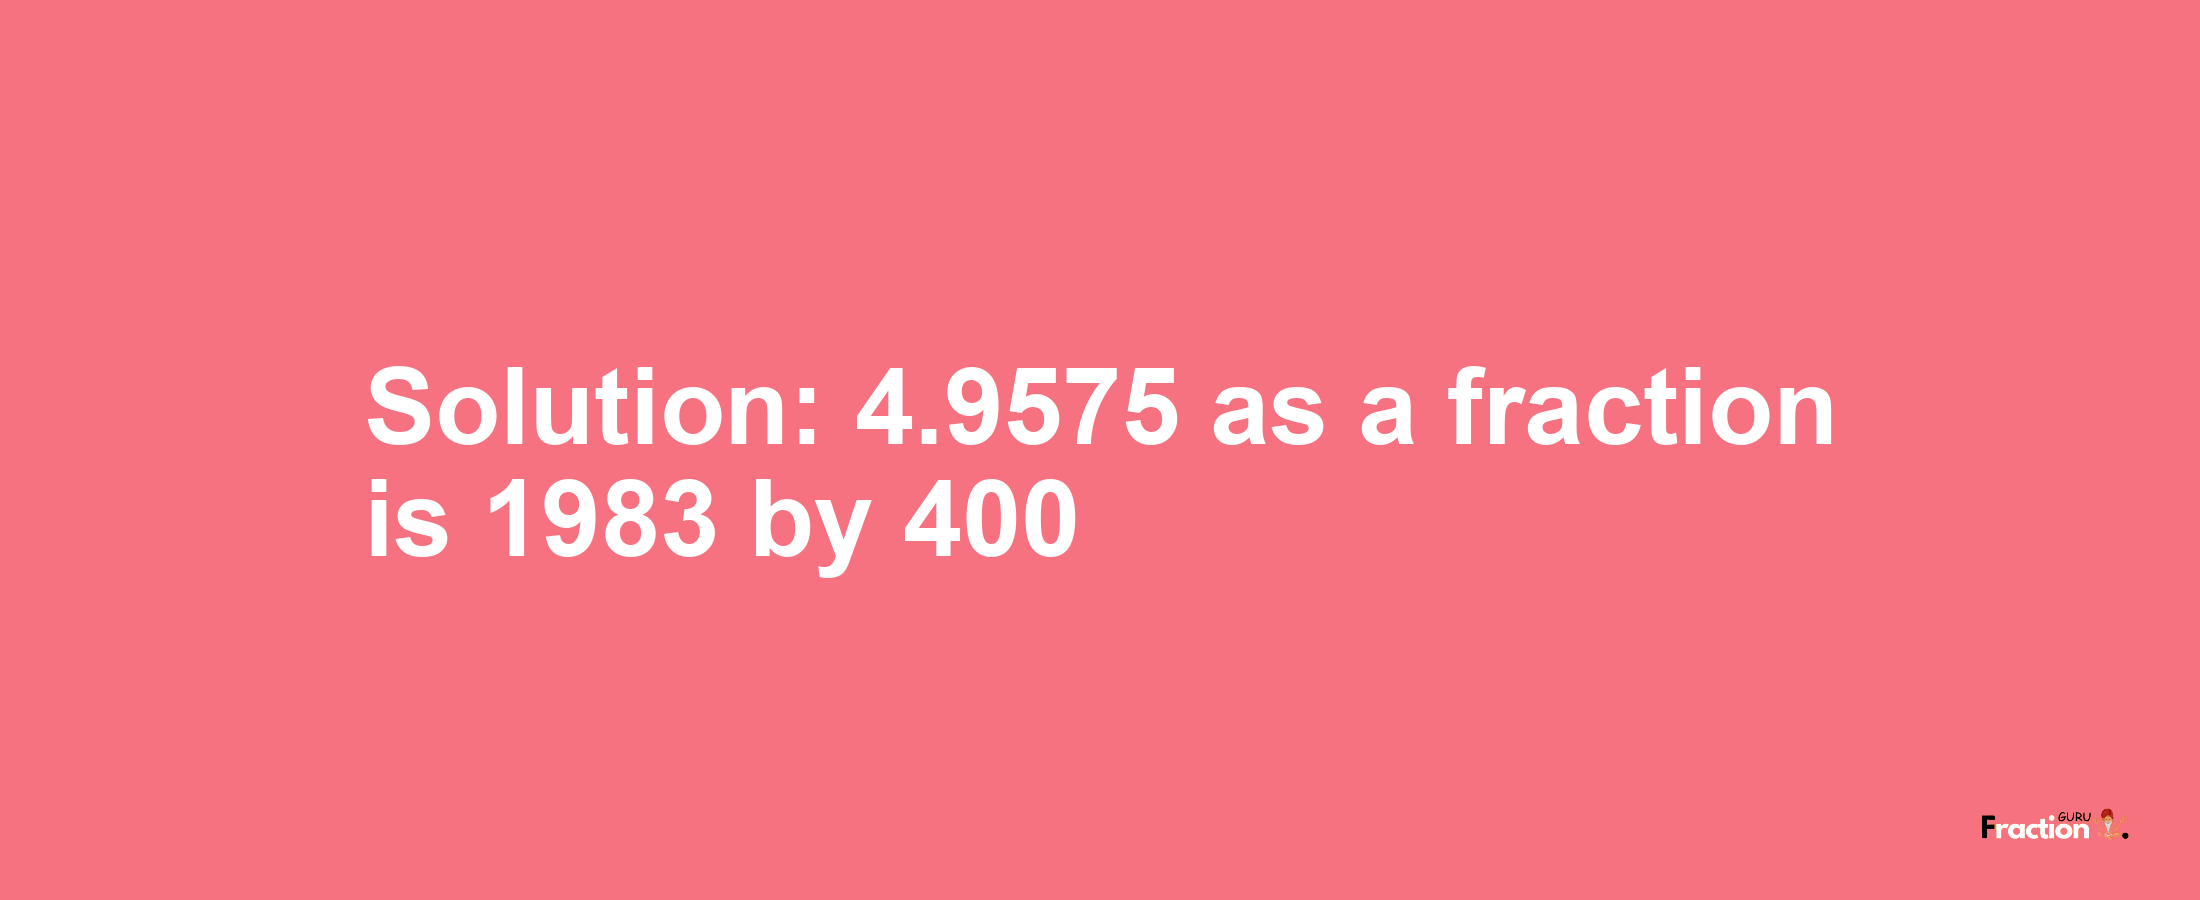 Solution:4.9575 as a fraction is 1983/400